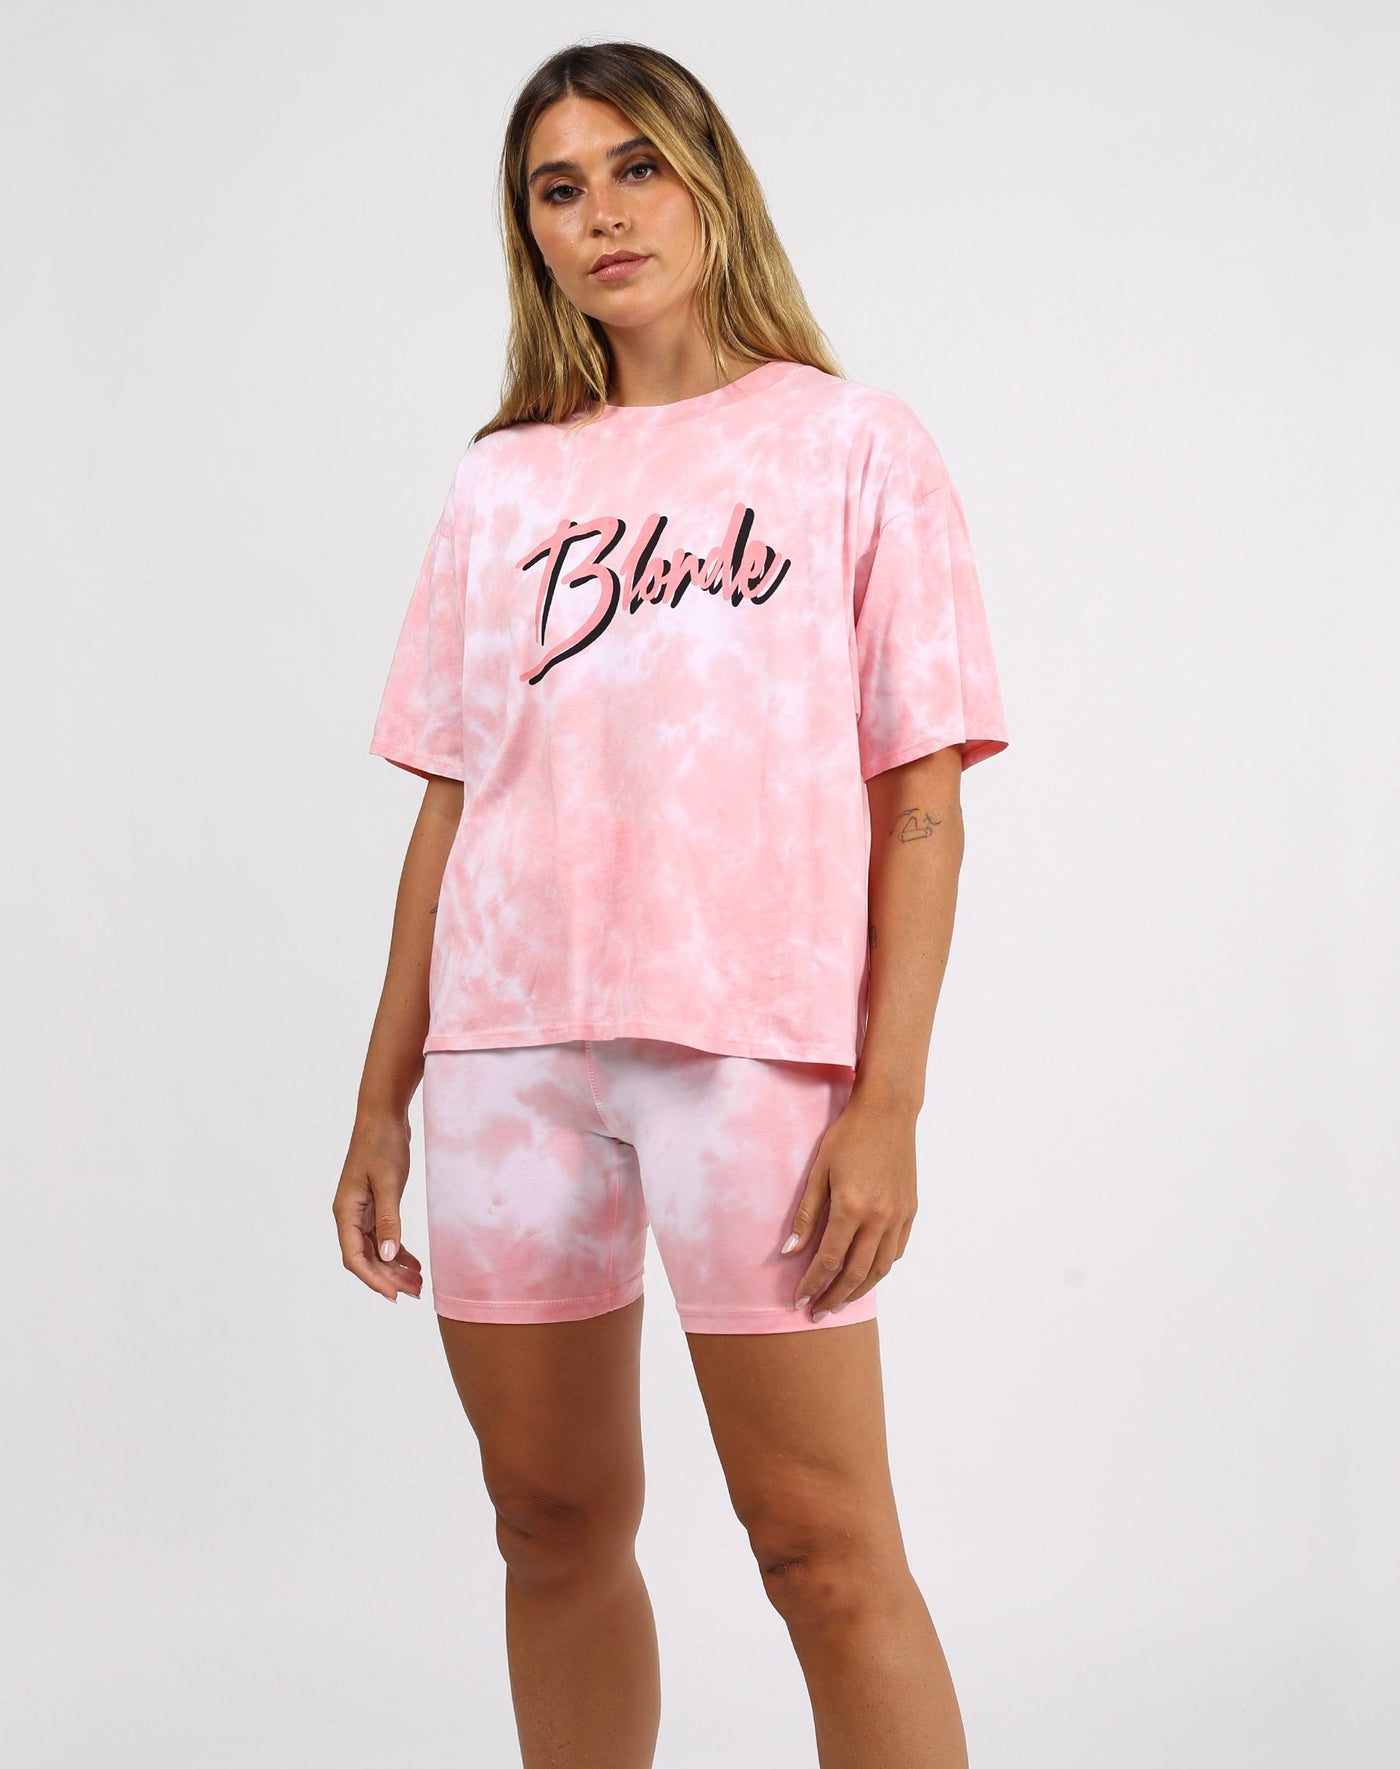 The "BLONDE" Pink Marble Tie-Dye Boxy Tee